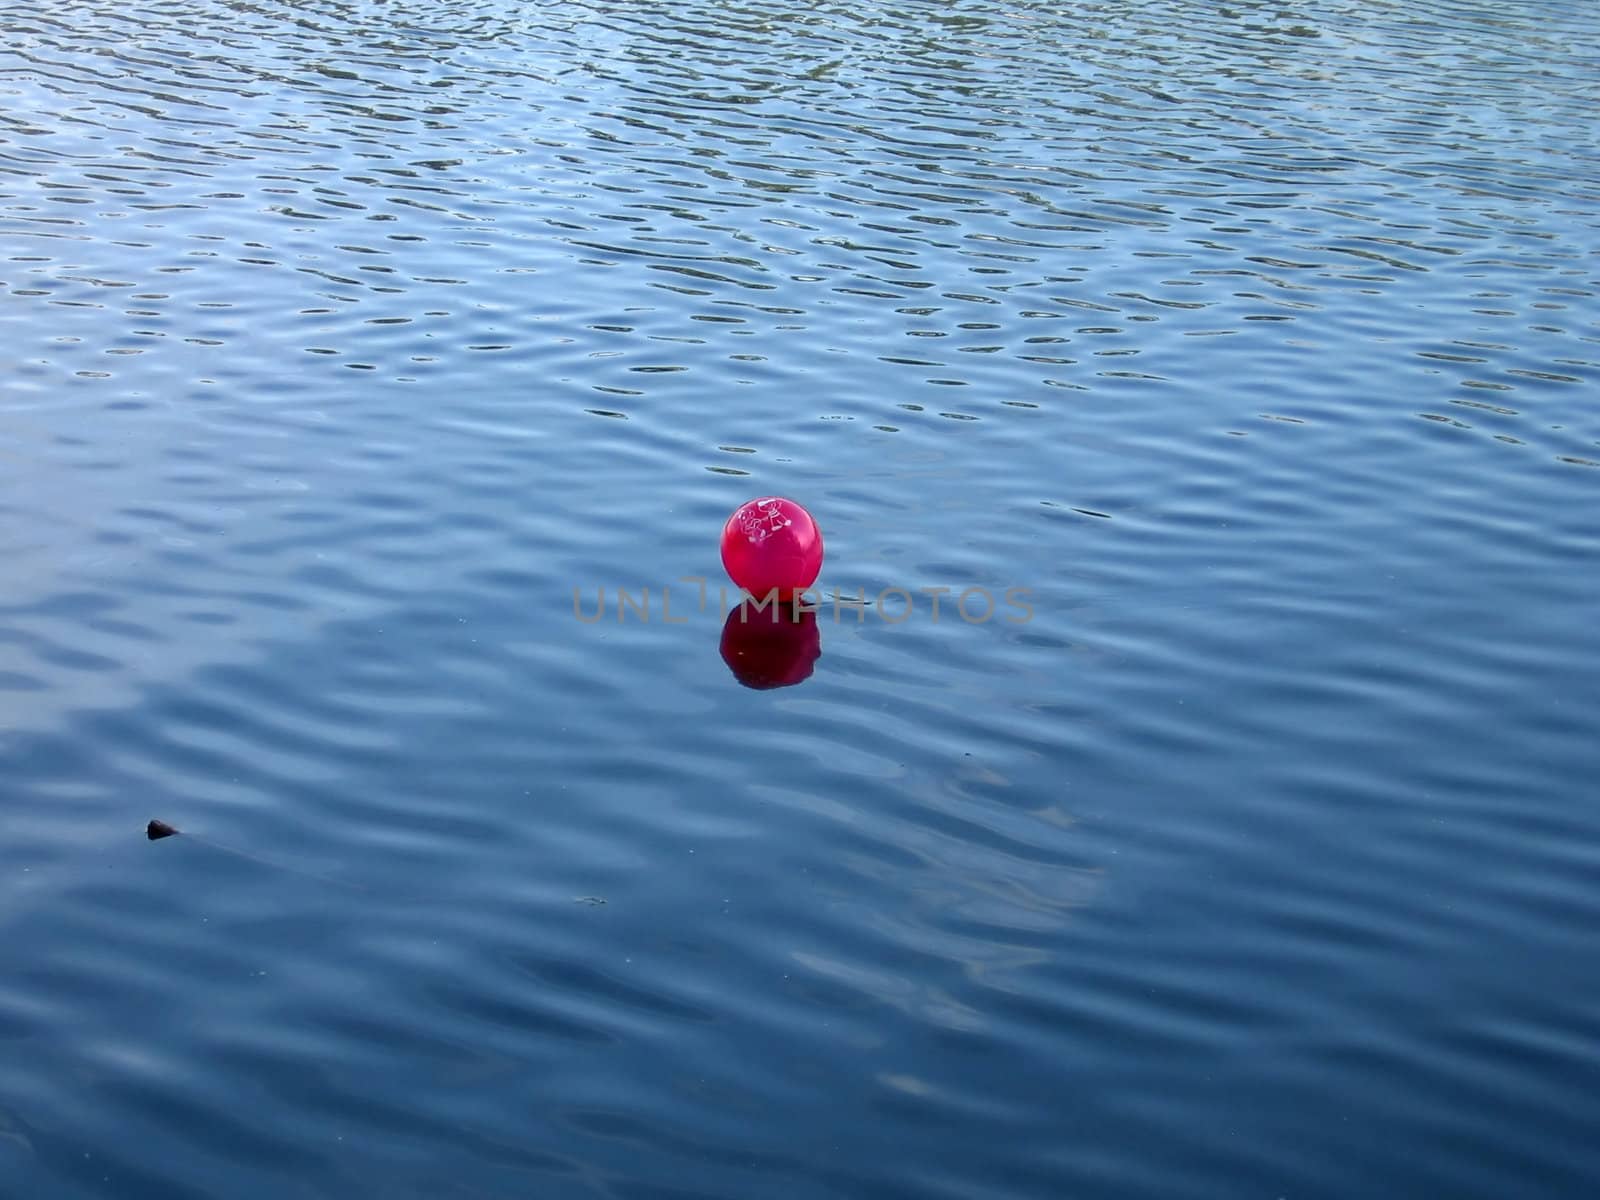 Red cute ball is on the pond water near Moscow